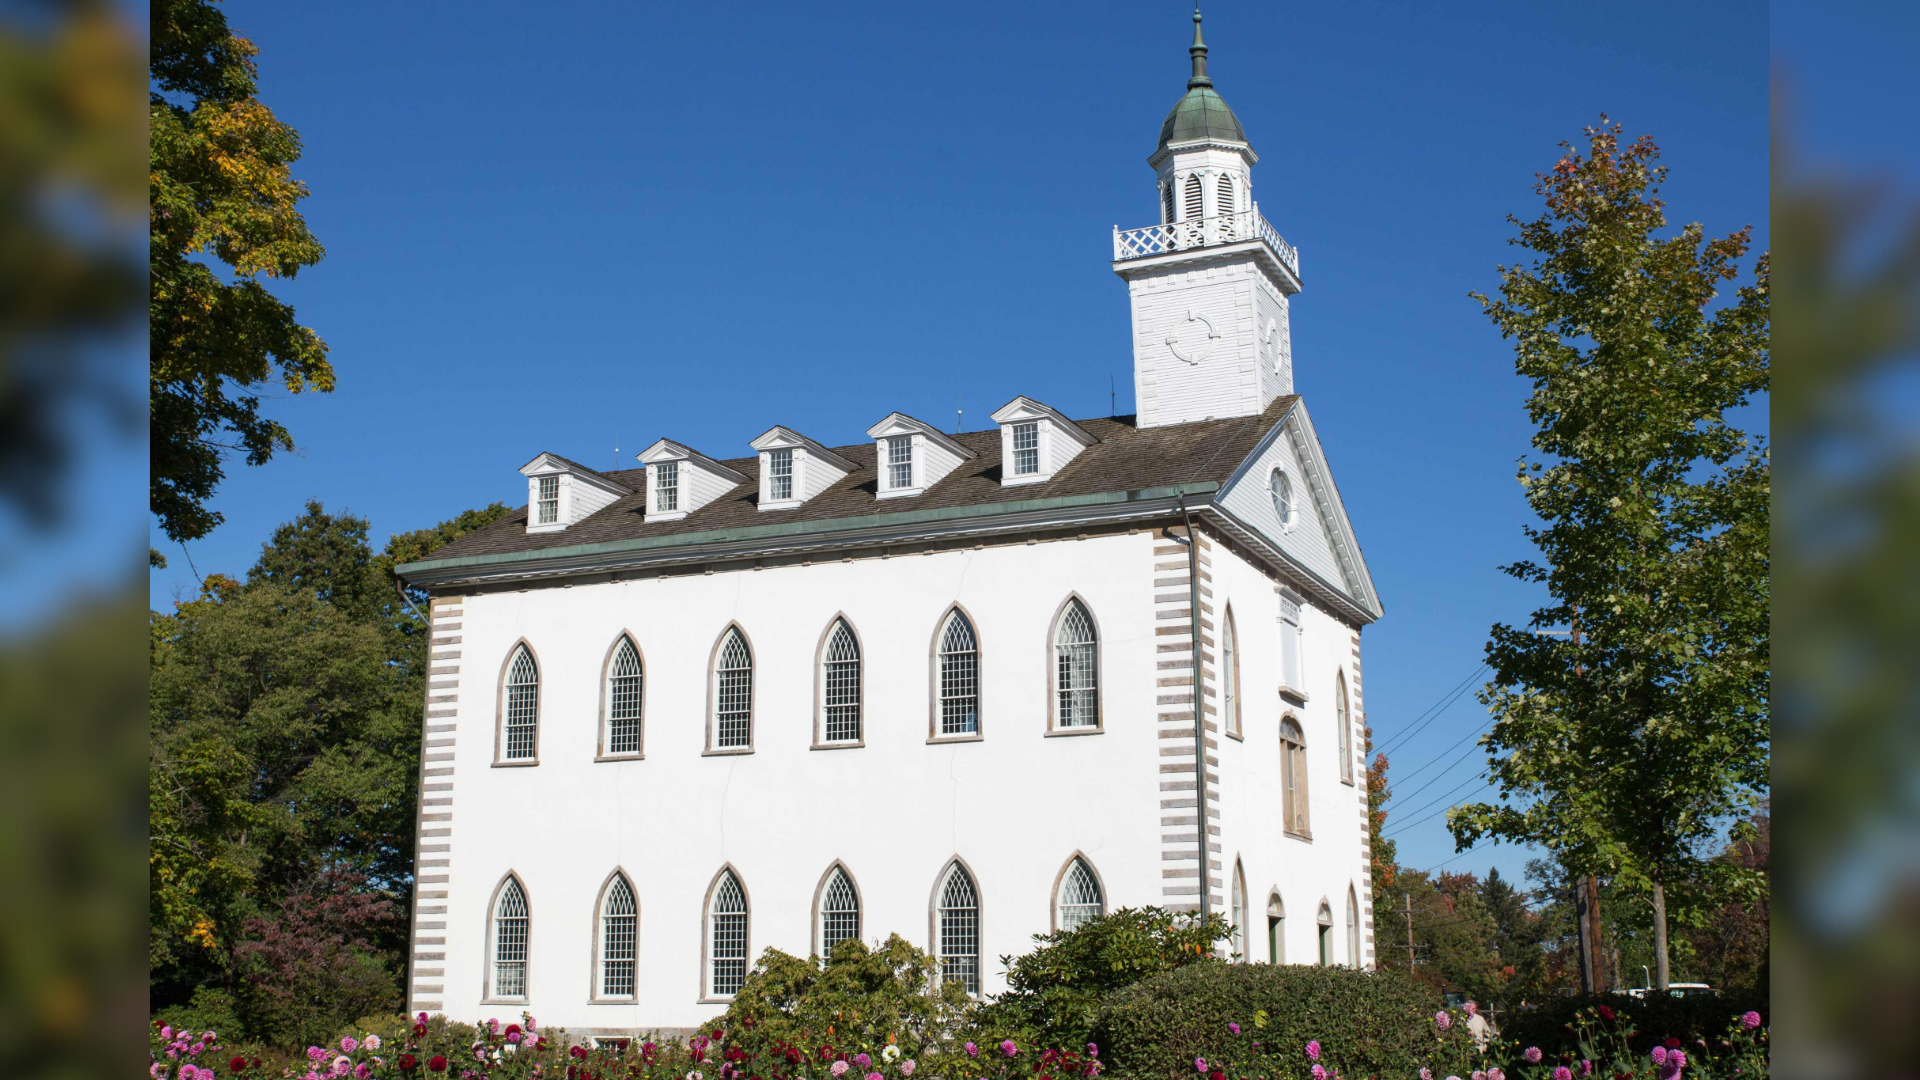 The Kirtland Temple pictured, which was bought by The Church of Jesus Christ of Latter-day Saints...